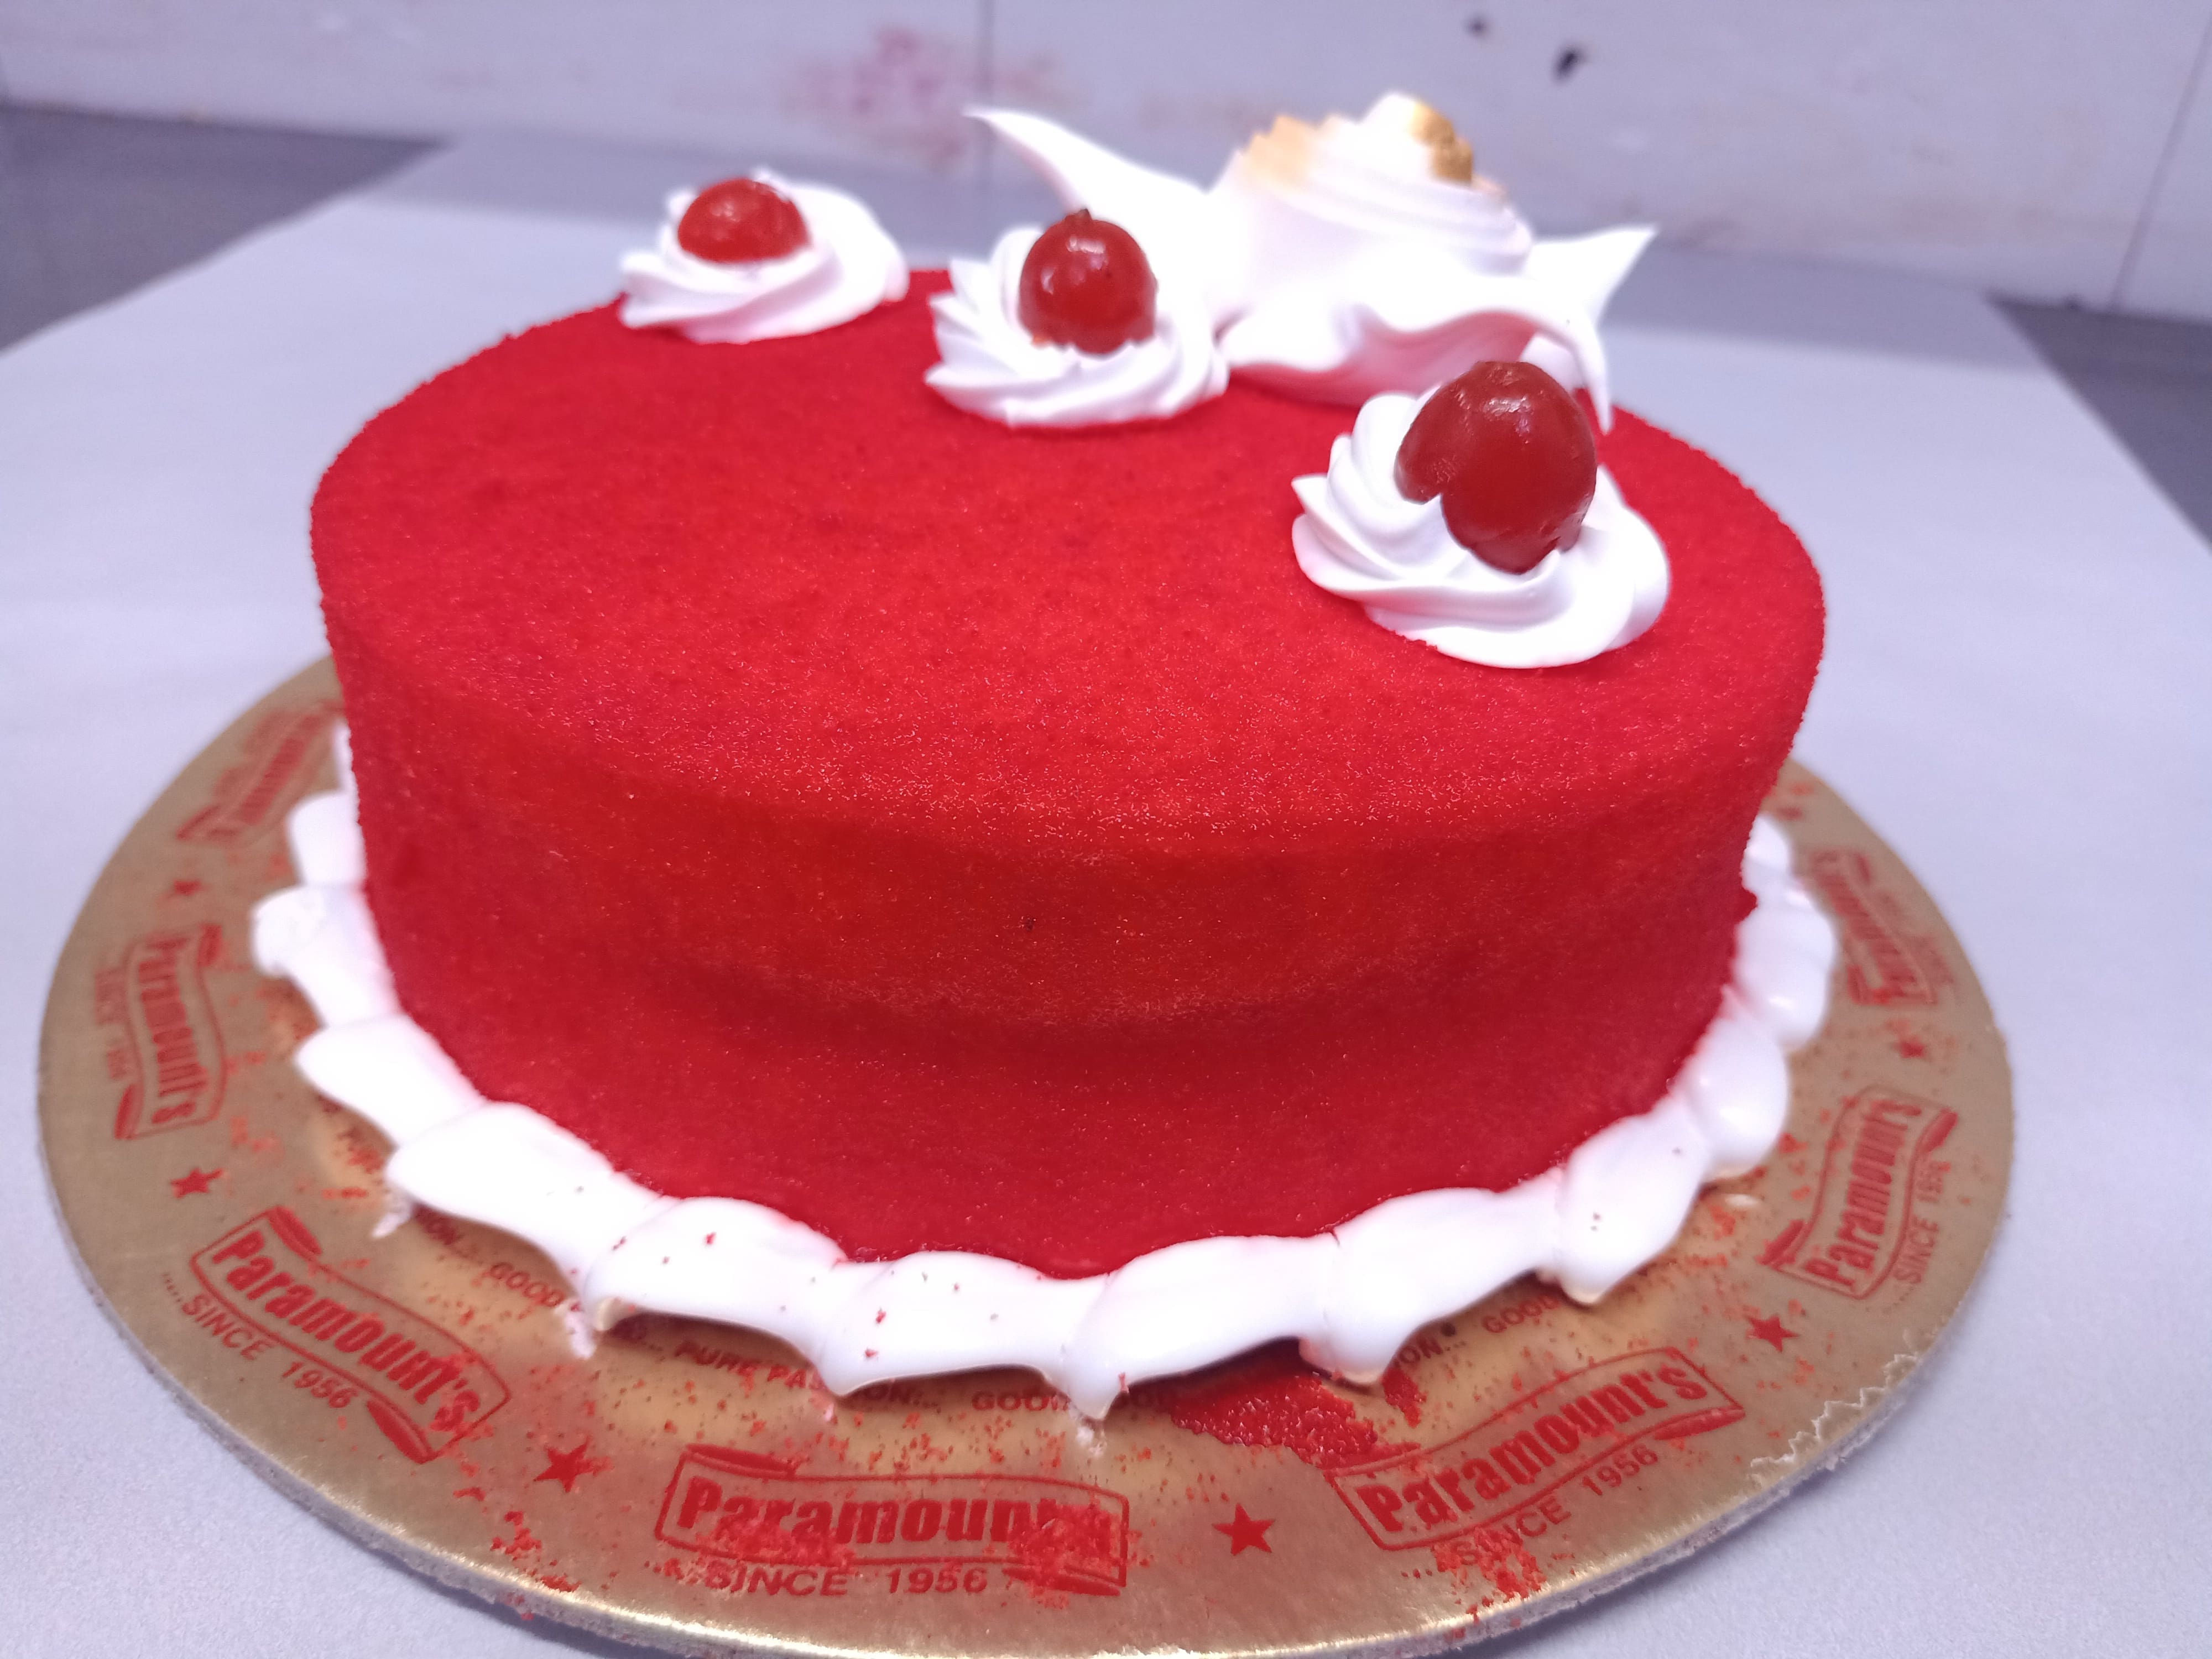 CITY CAKE SHOP - Bakery - Coimbatore - Tamil Nadu | Yappe.in